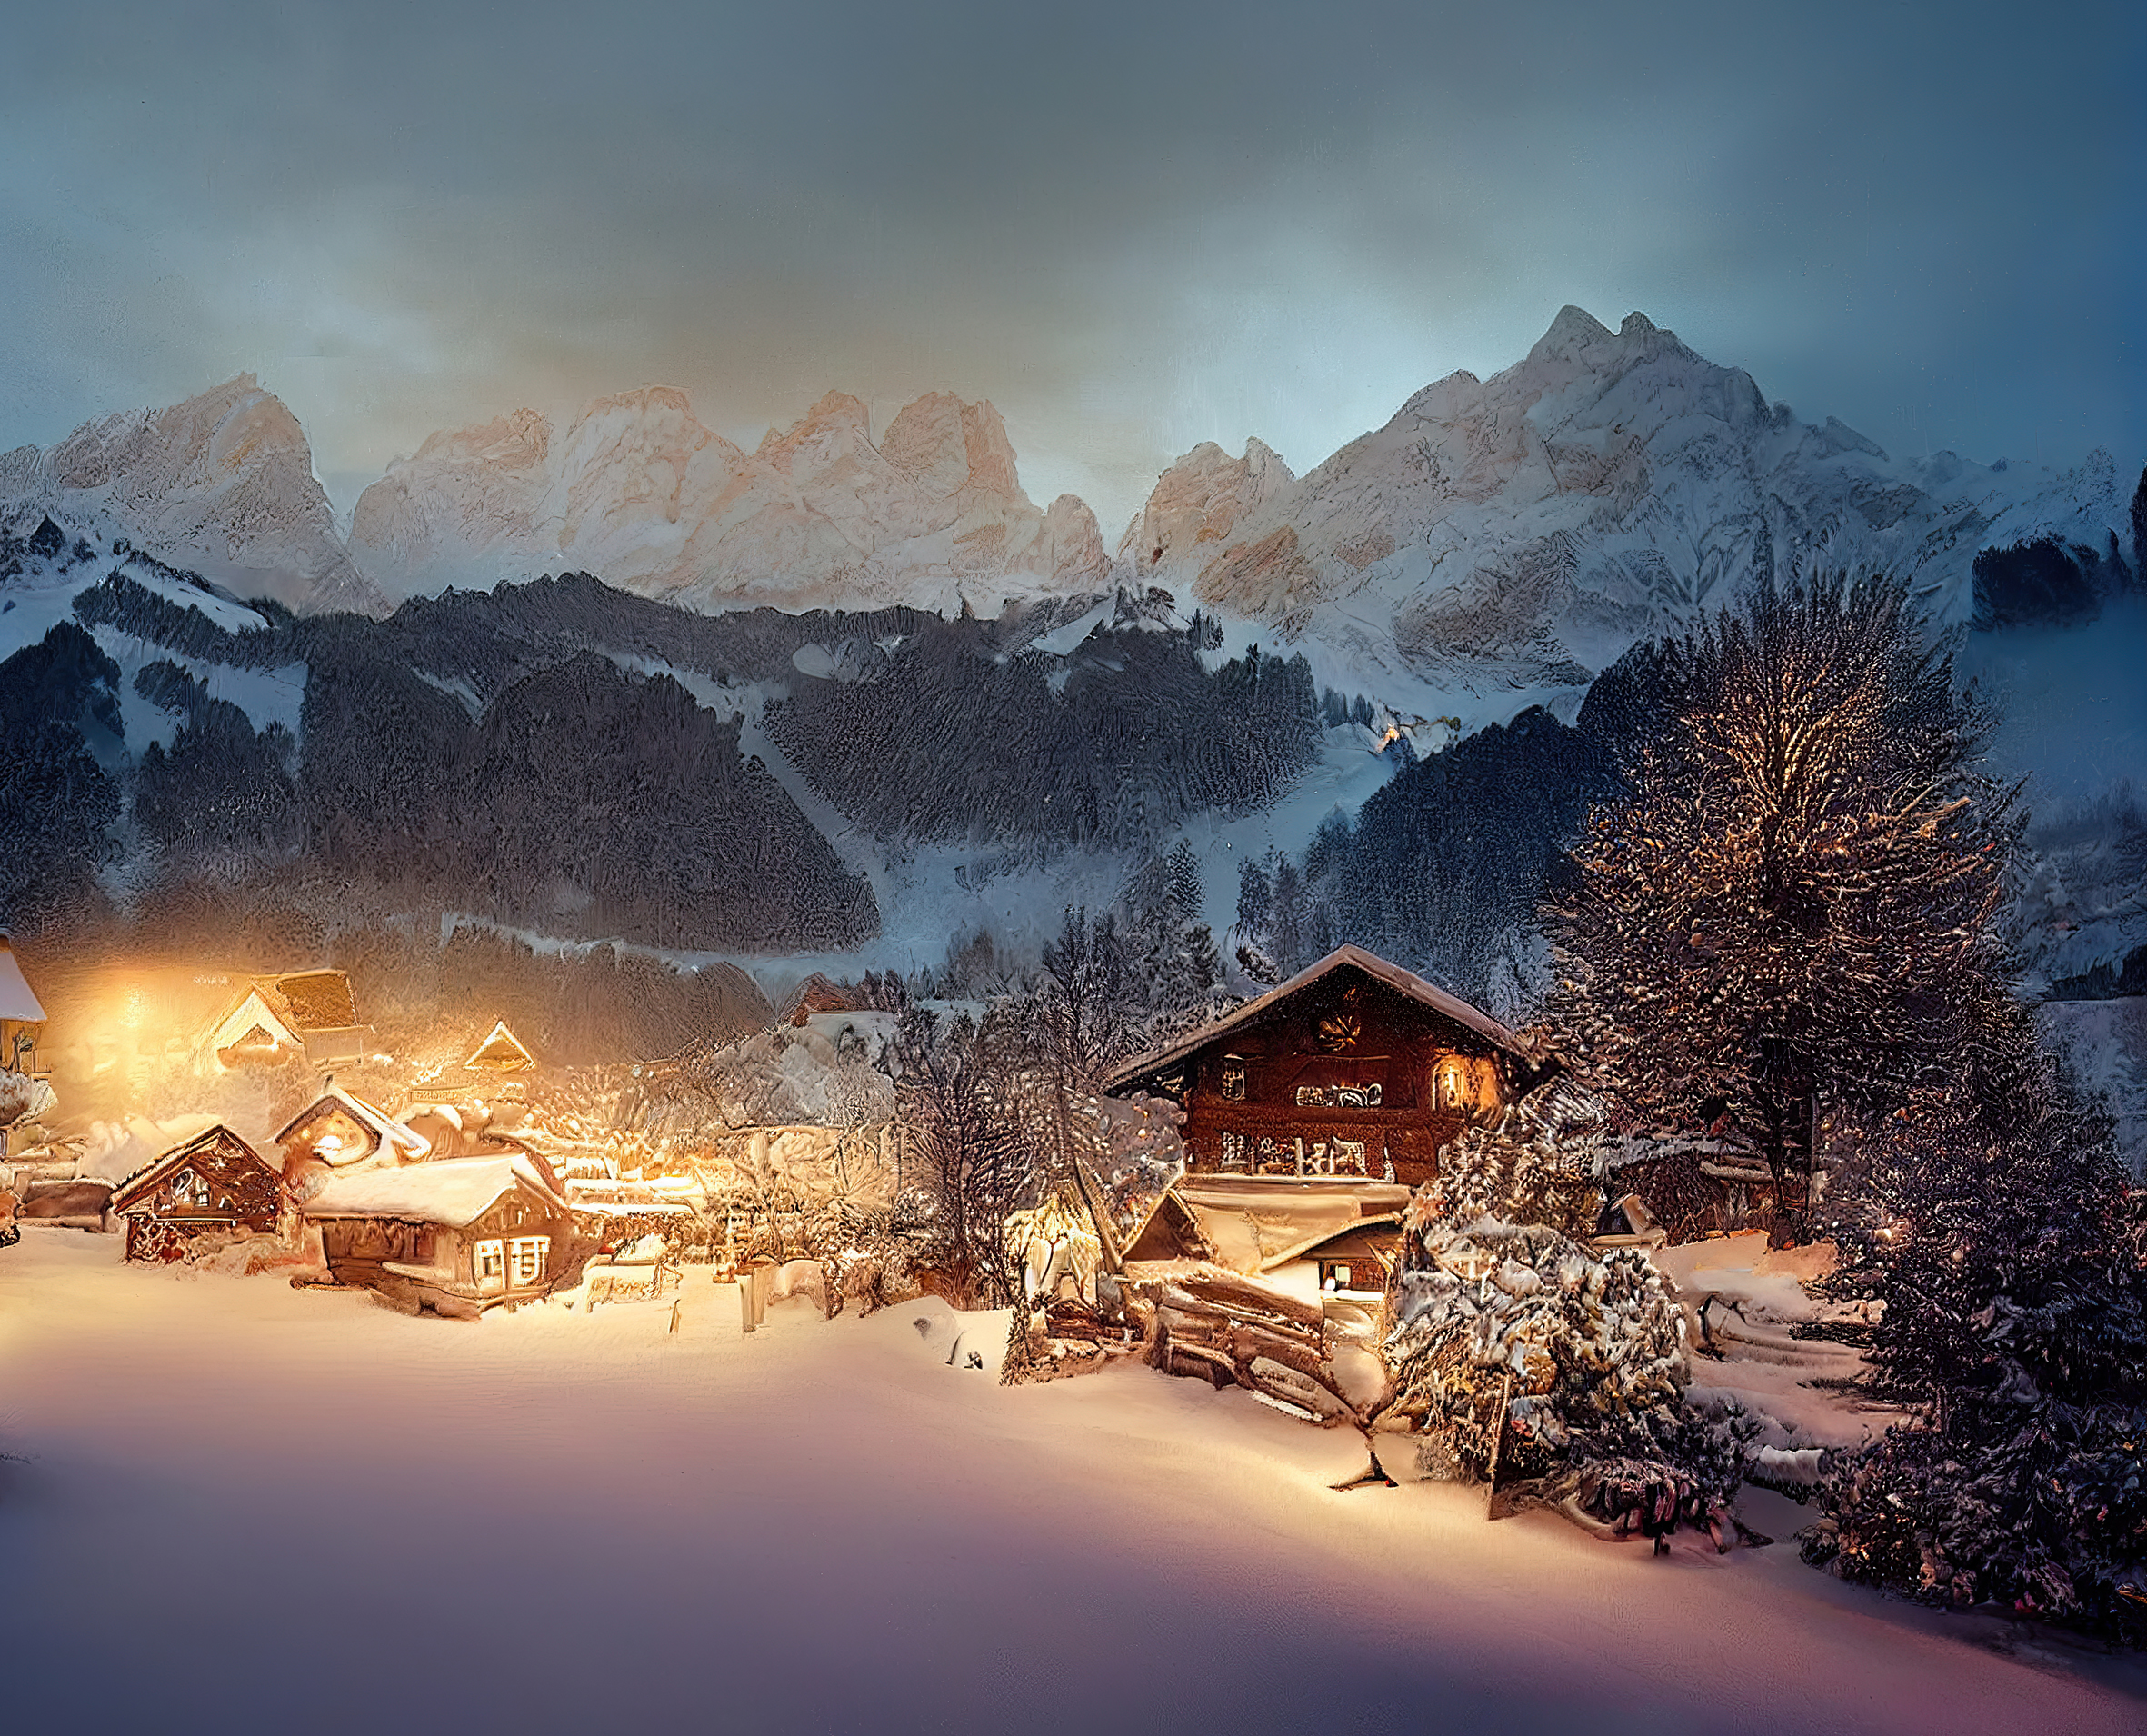 A snow-covered and brightly lit village at dusk. A mountain panorama can be seen behind it.